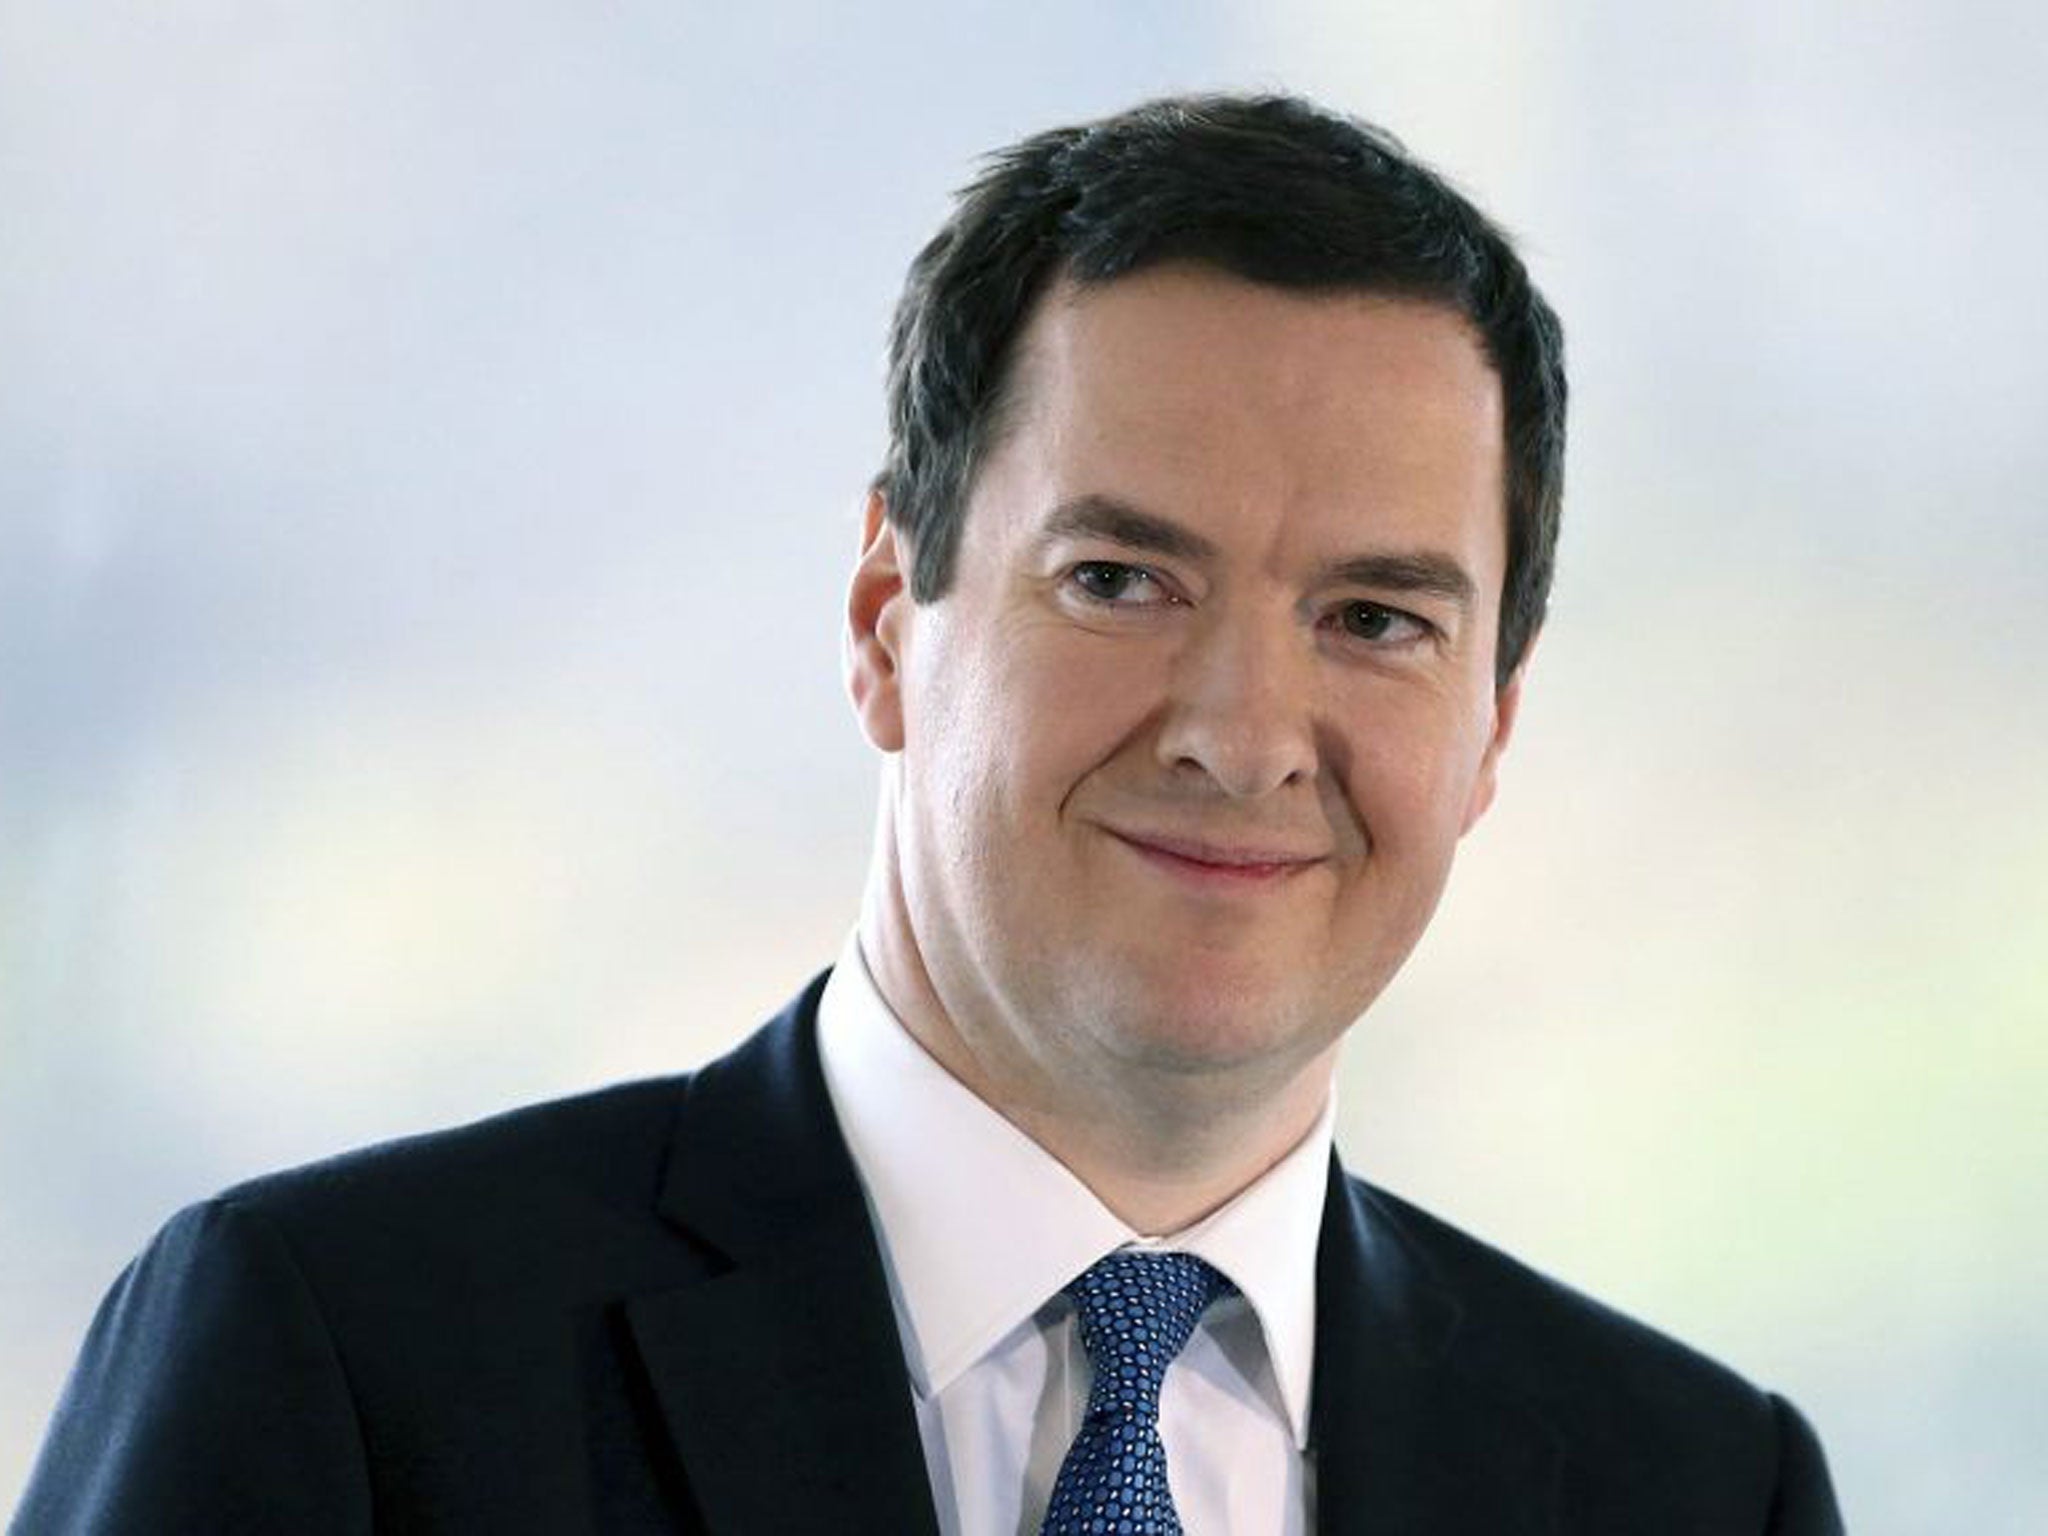 George Osborne has gone on the 5:2 diet, fasting for two days a week